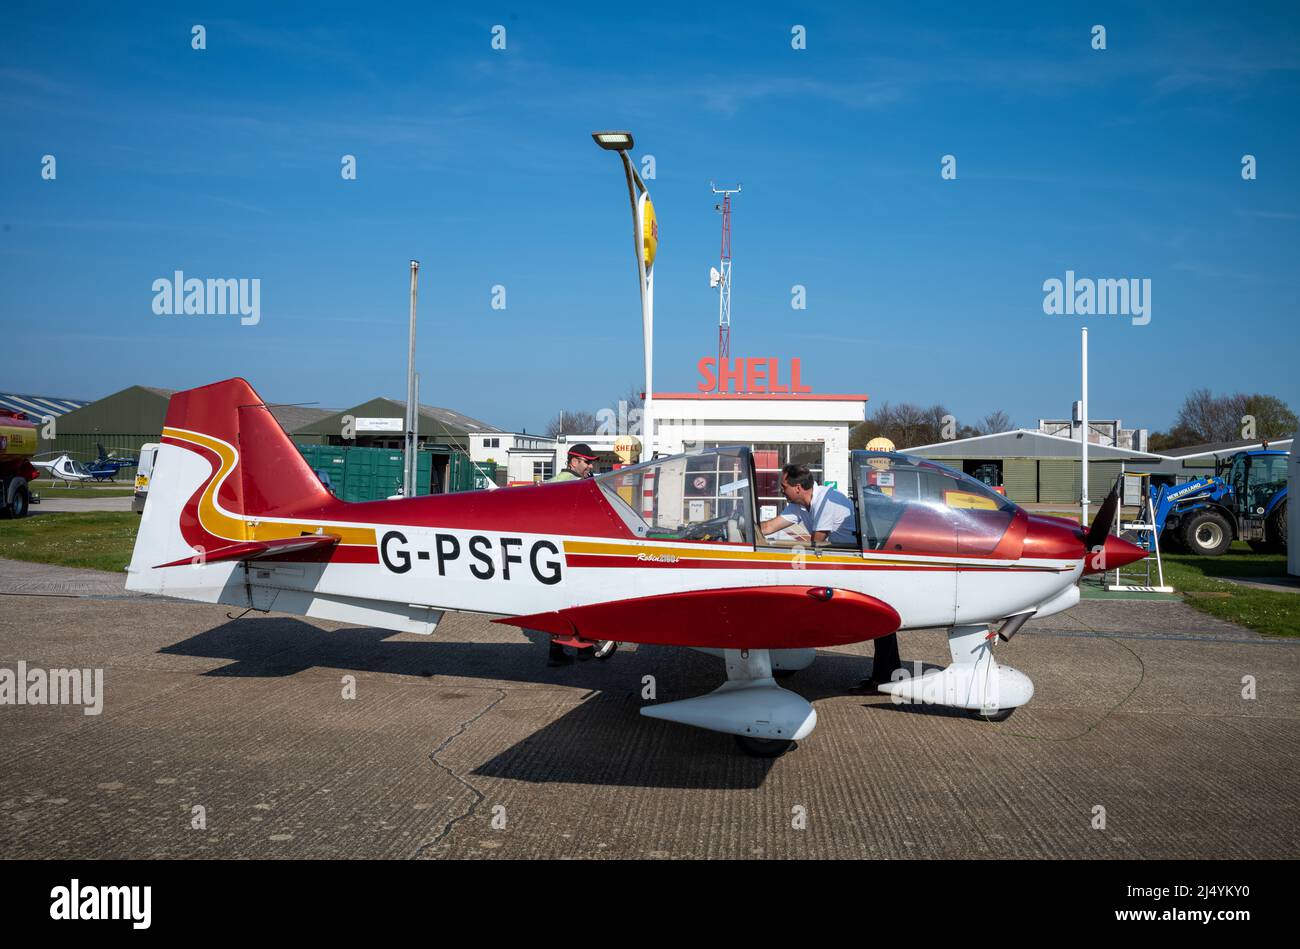 A pilot waits as his Robin 2160 2-seater plane is refuelled at Goodwood aerodrome in West Sussex, UK Stock Photo